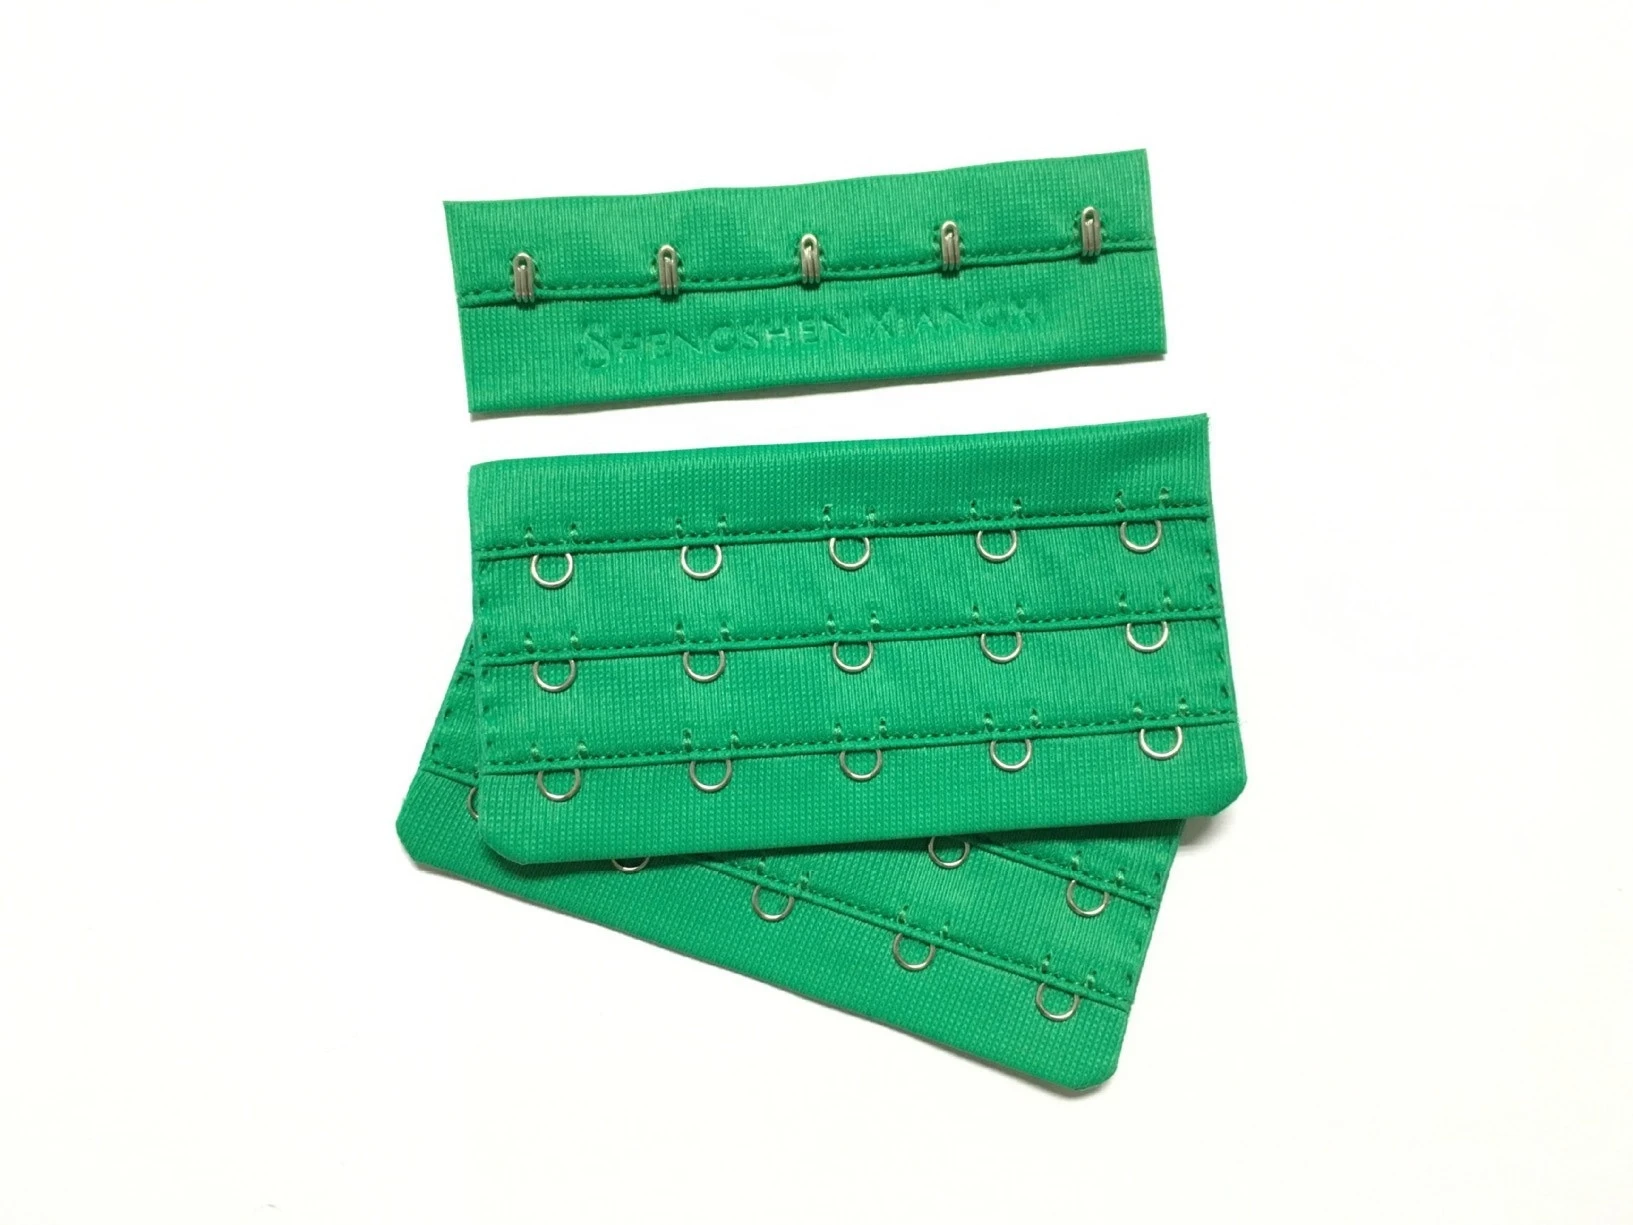 Buy 3*5 Underwear Accessories 3 Rows, 5 Hook And Eye Tape Bra Extender For  Adjustable Ba from Shantou Holy Trade Co., Ltd., China